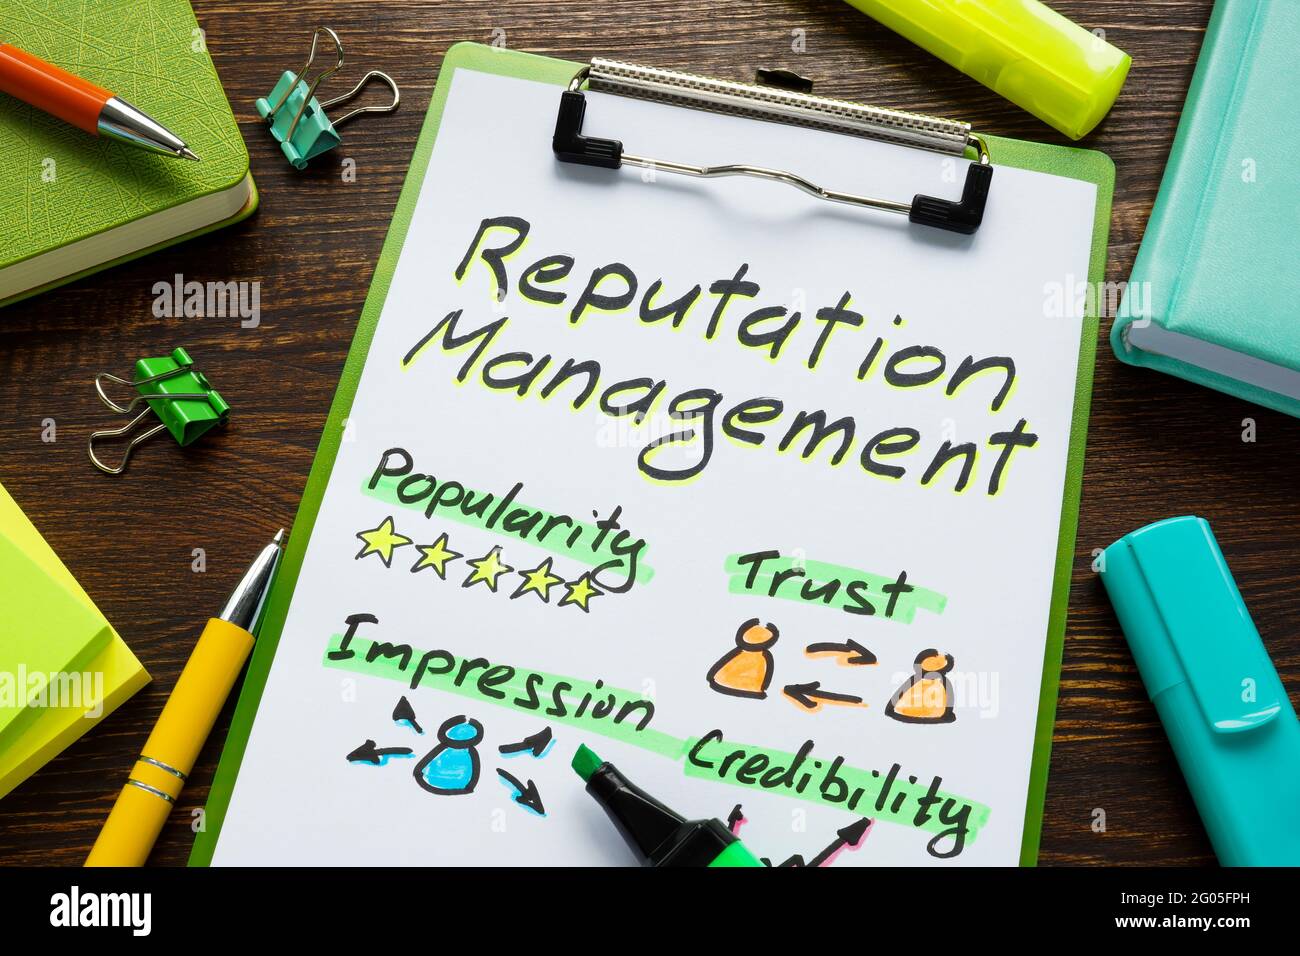 Reputation management plan about trust and popularity. Stock Photo